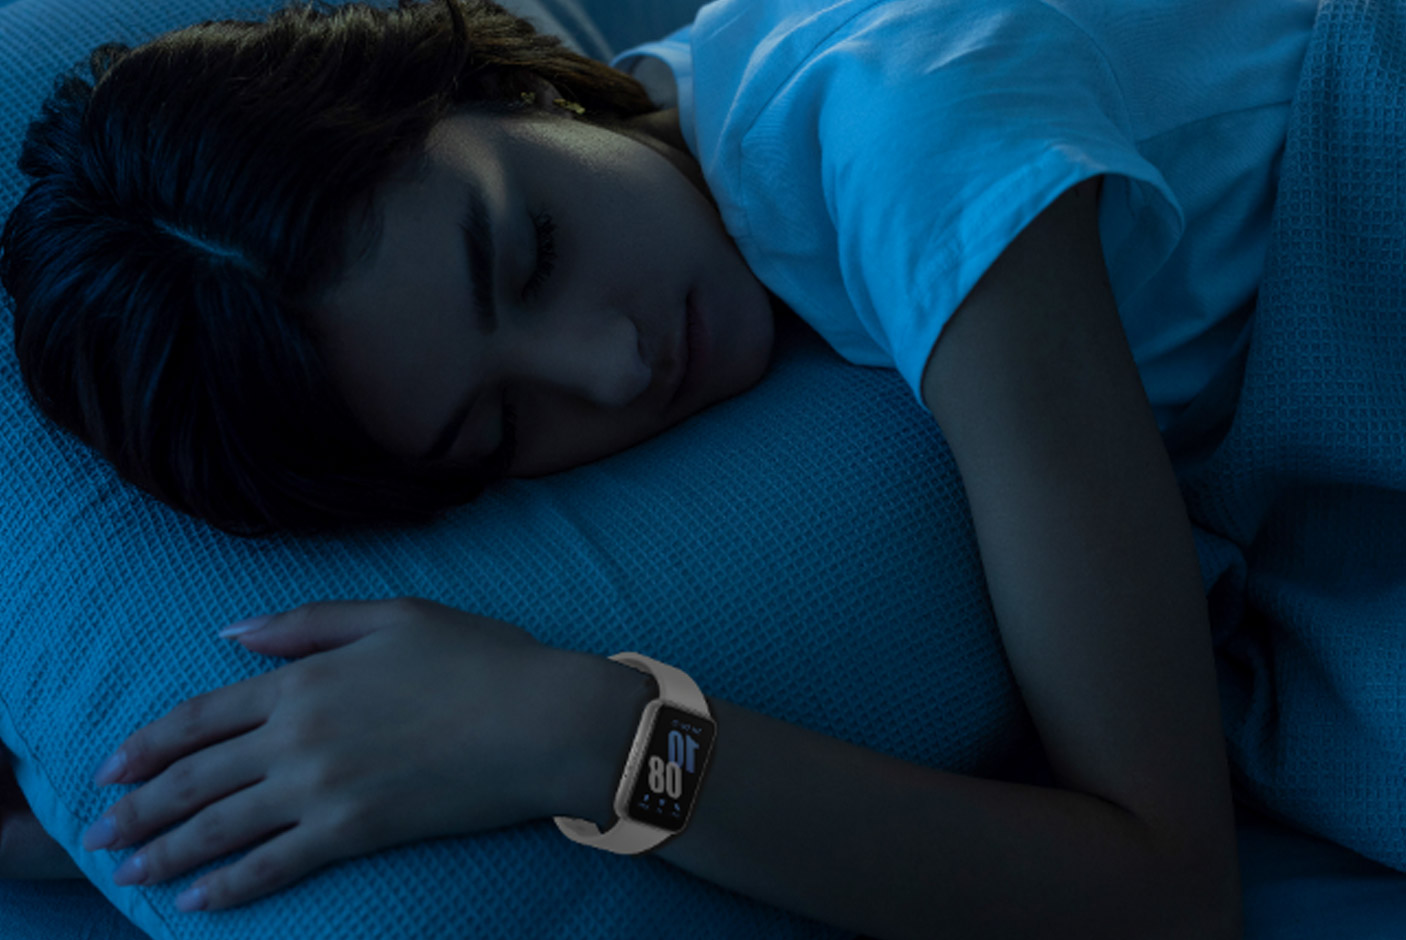 Based on individual sleep patterns, the Galaxy Fit3 provides users with personalized Sleep Coaching with meaningful insights that help them more intuitively understand their sleep, leading them to make positive changes.